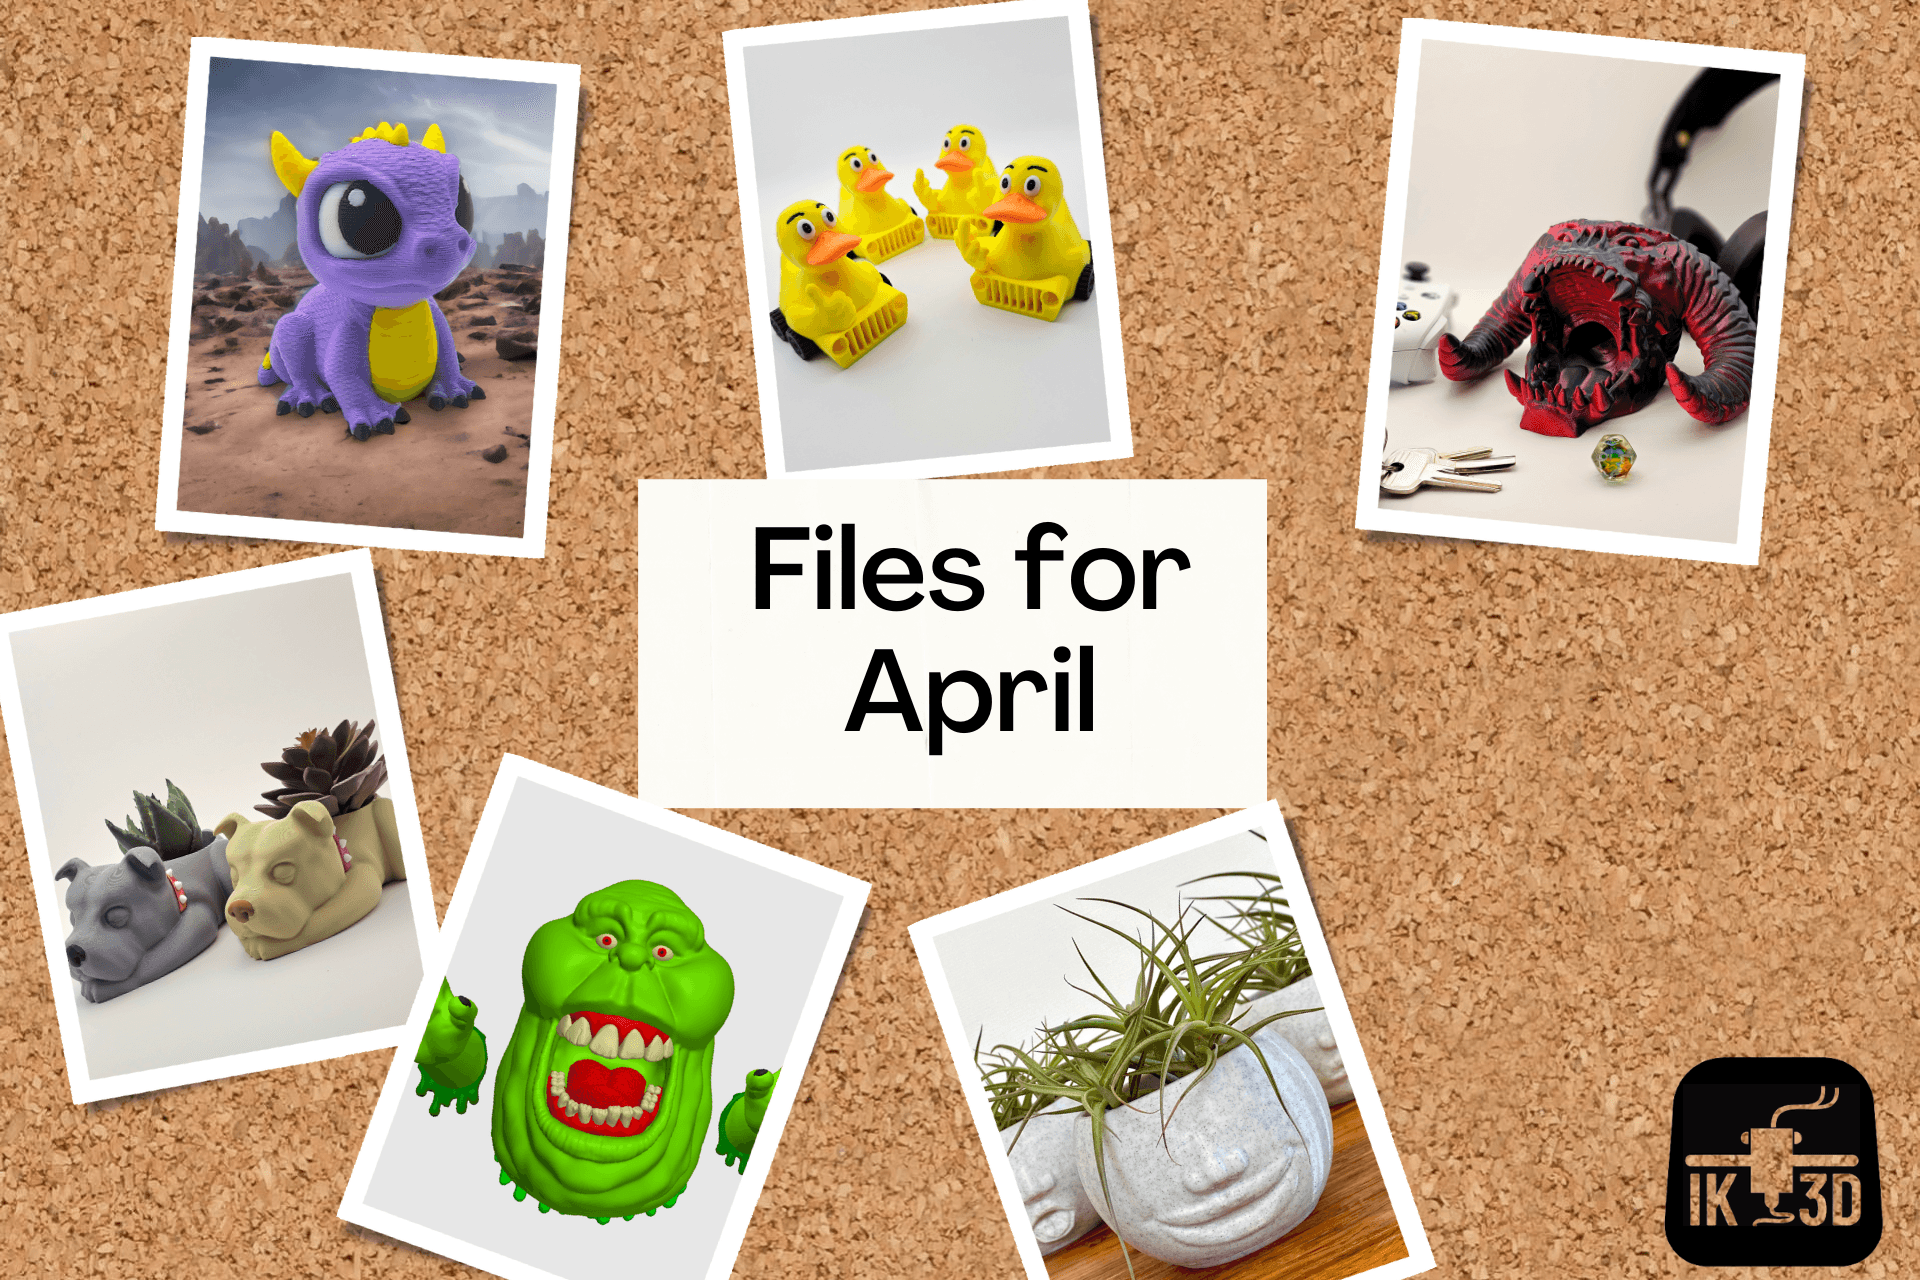 Files for April